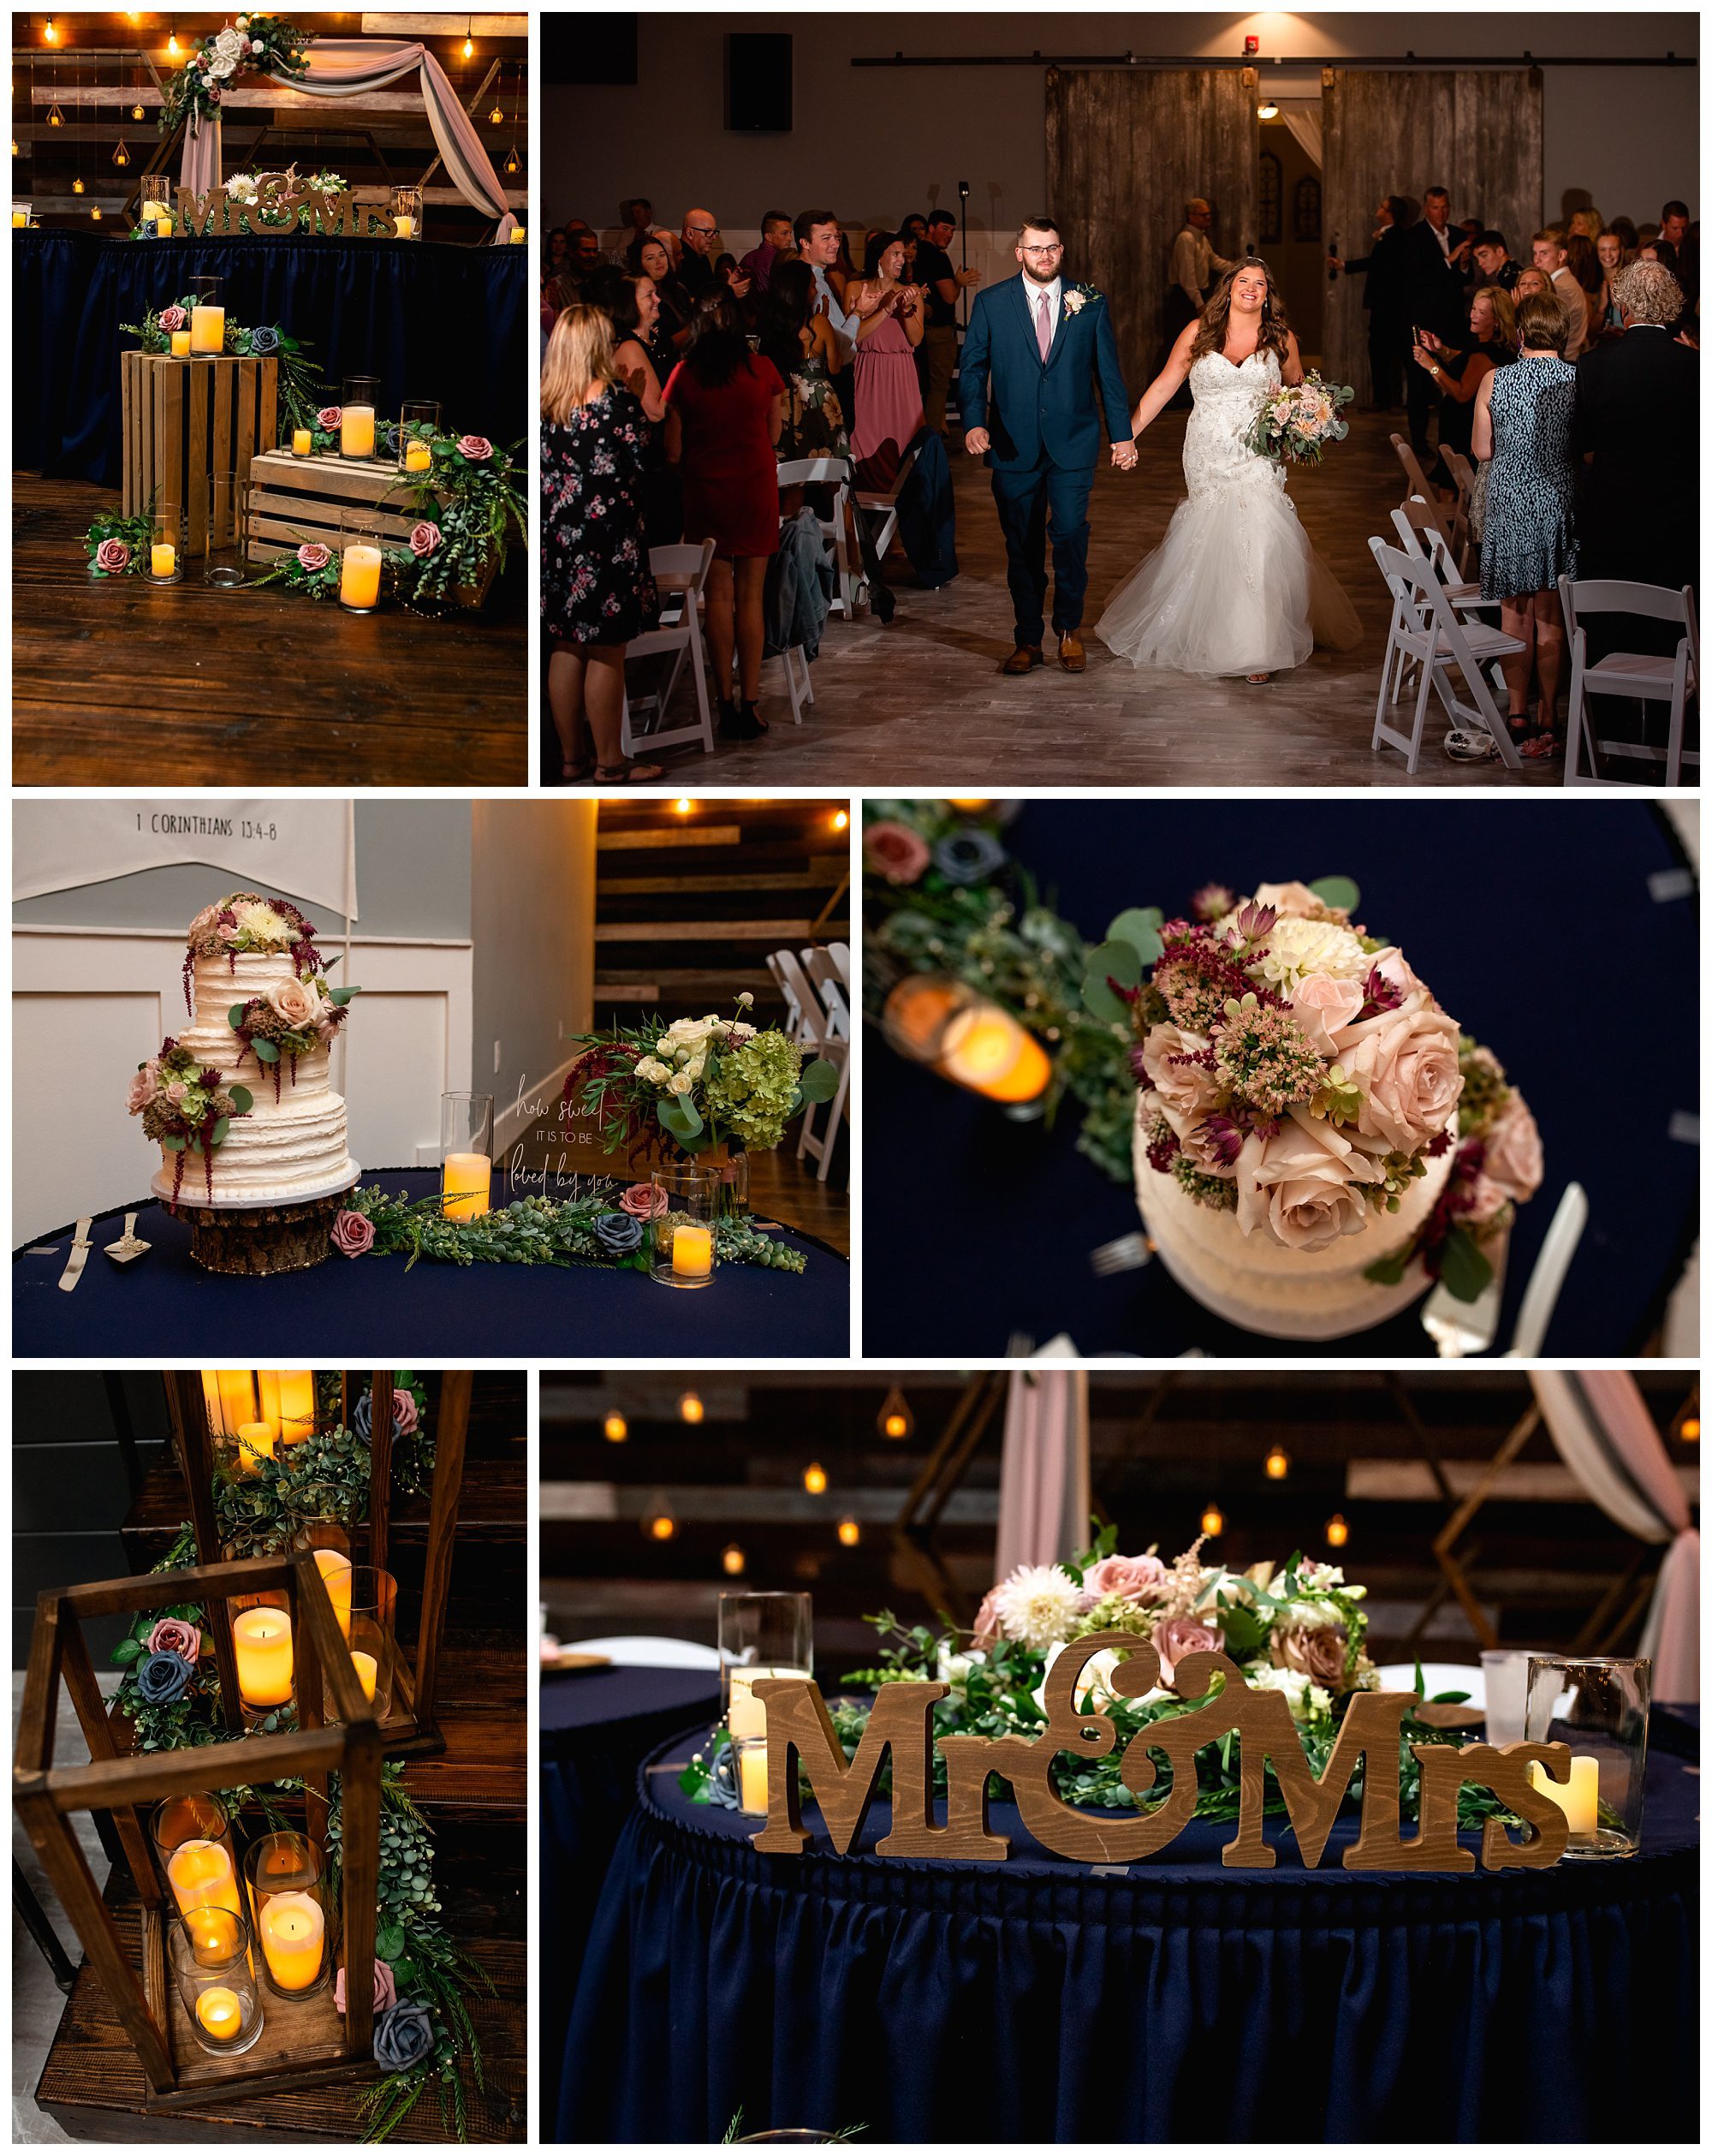 Bride and groom wedding day reception details